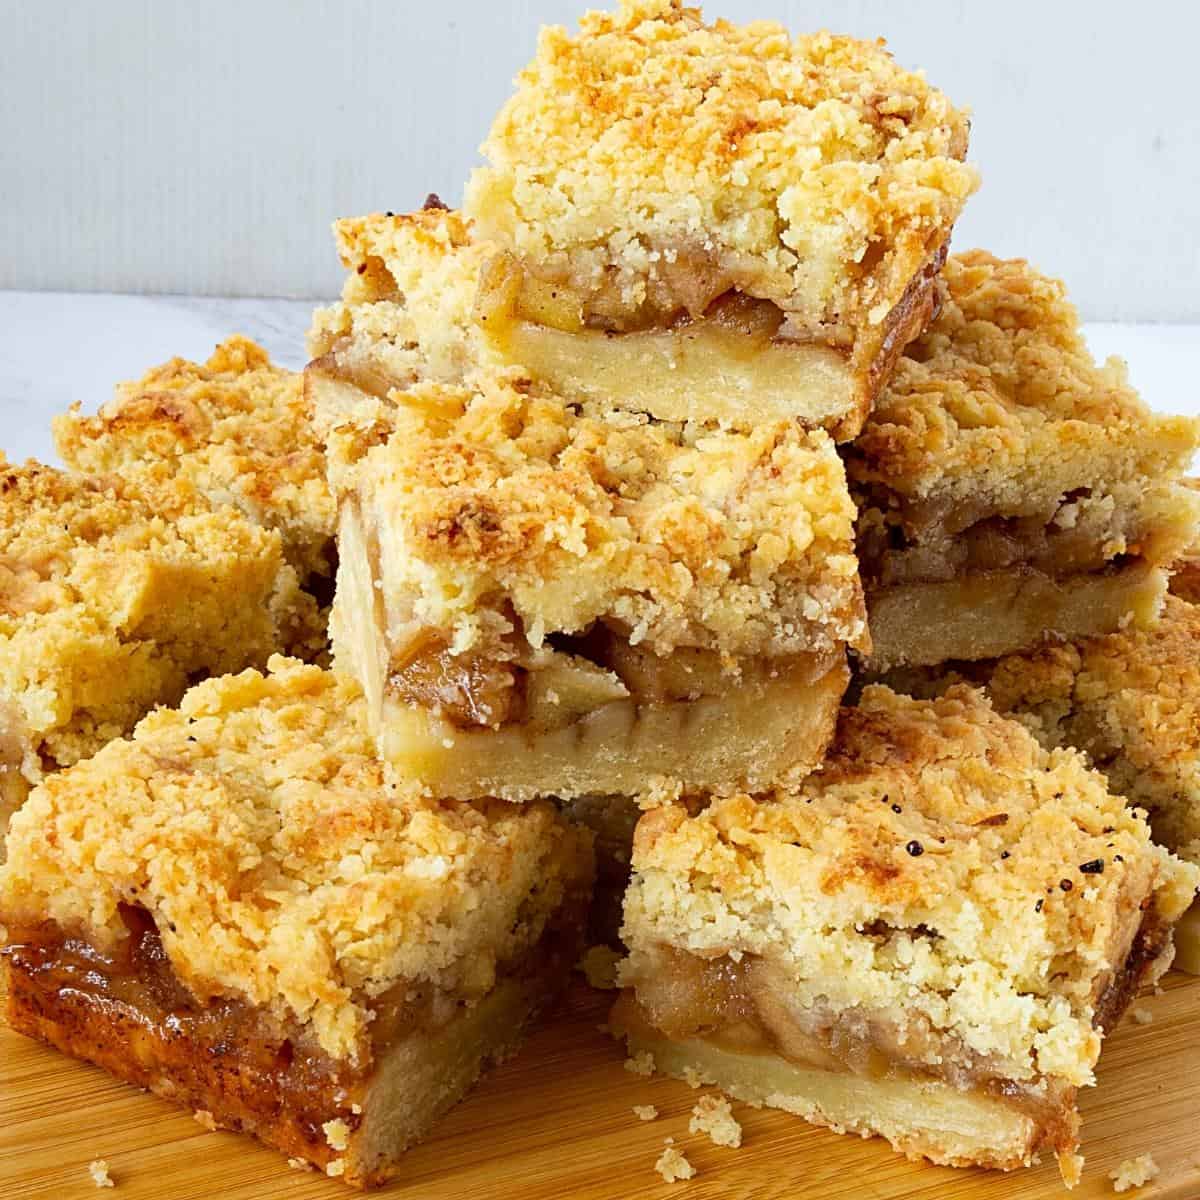 A stack of apple bars. on a wooden board.